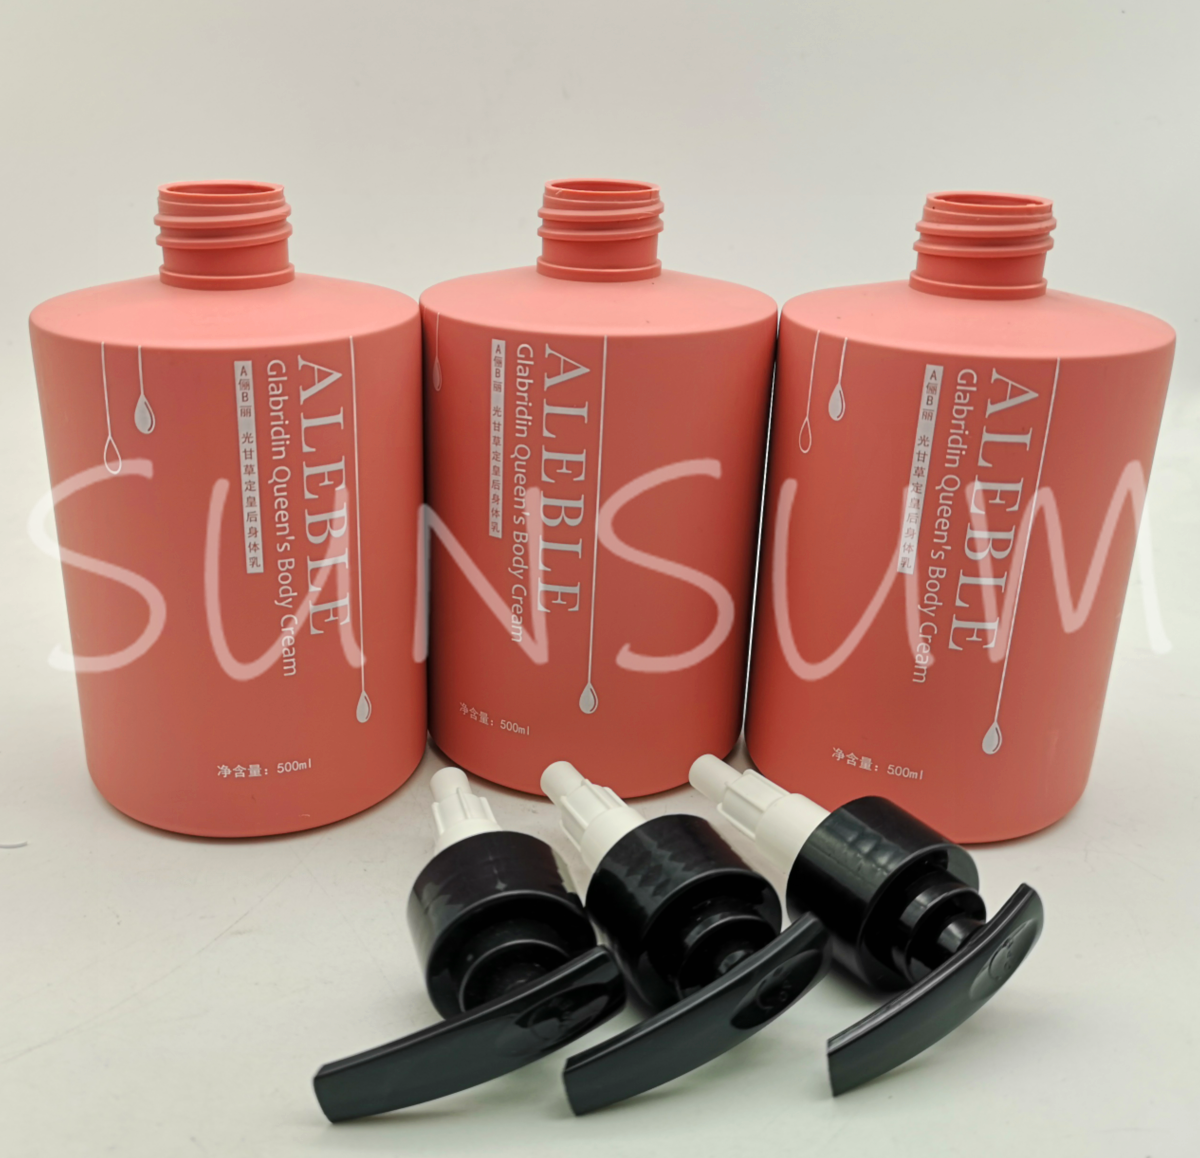 Sunsum high quality colored 500ml body lotion